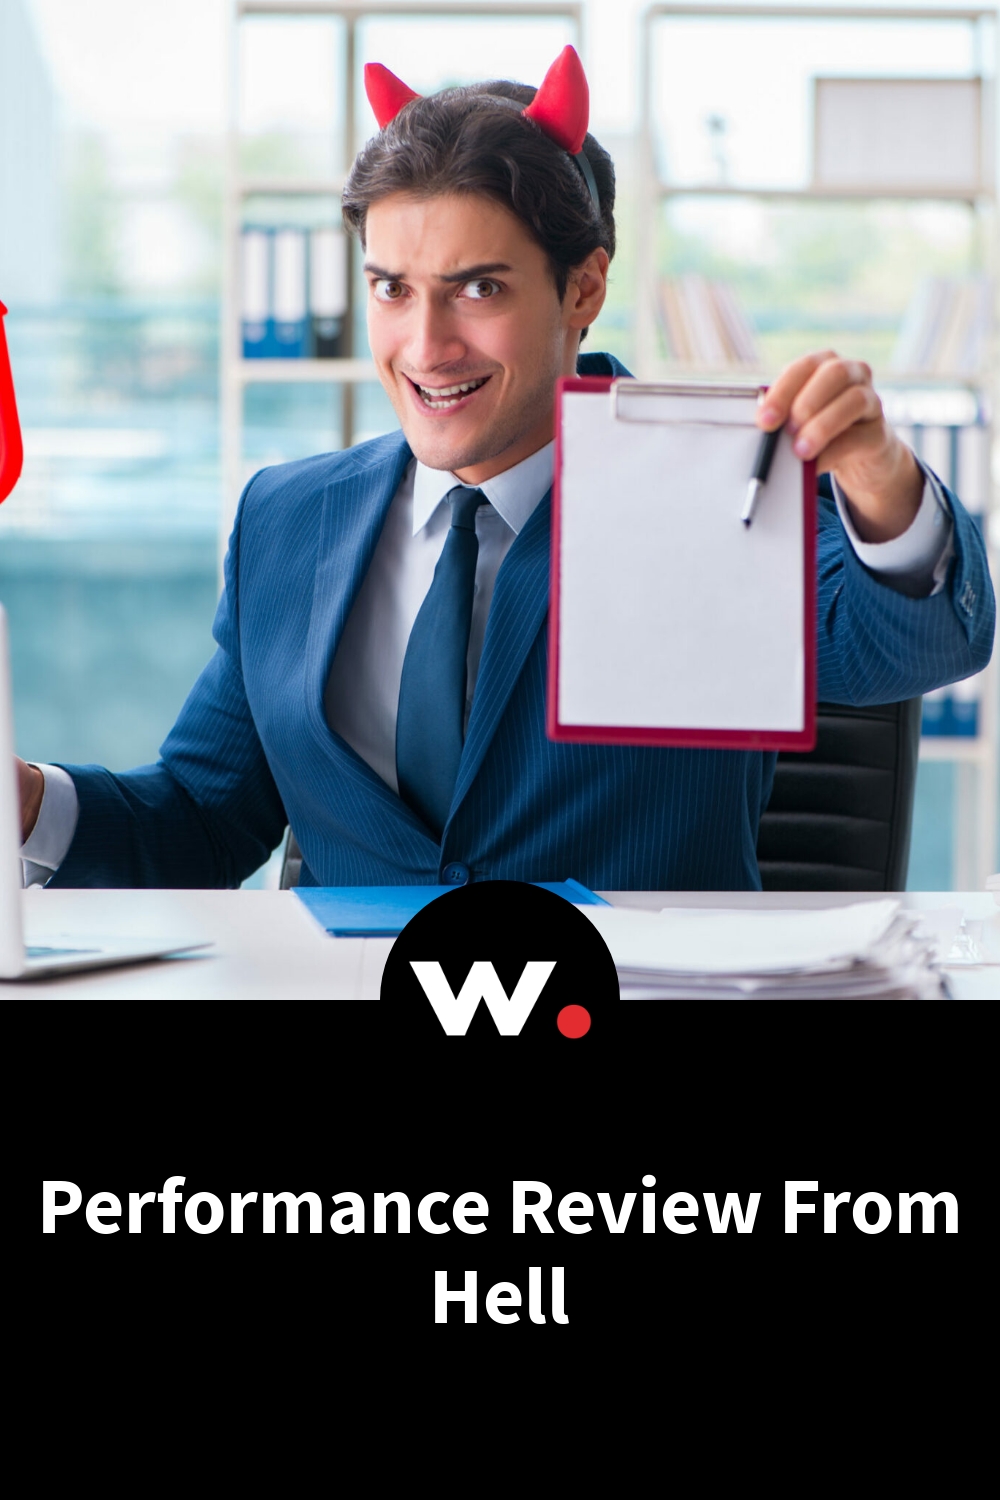 Performance Review From Hell